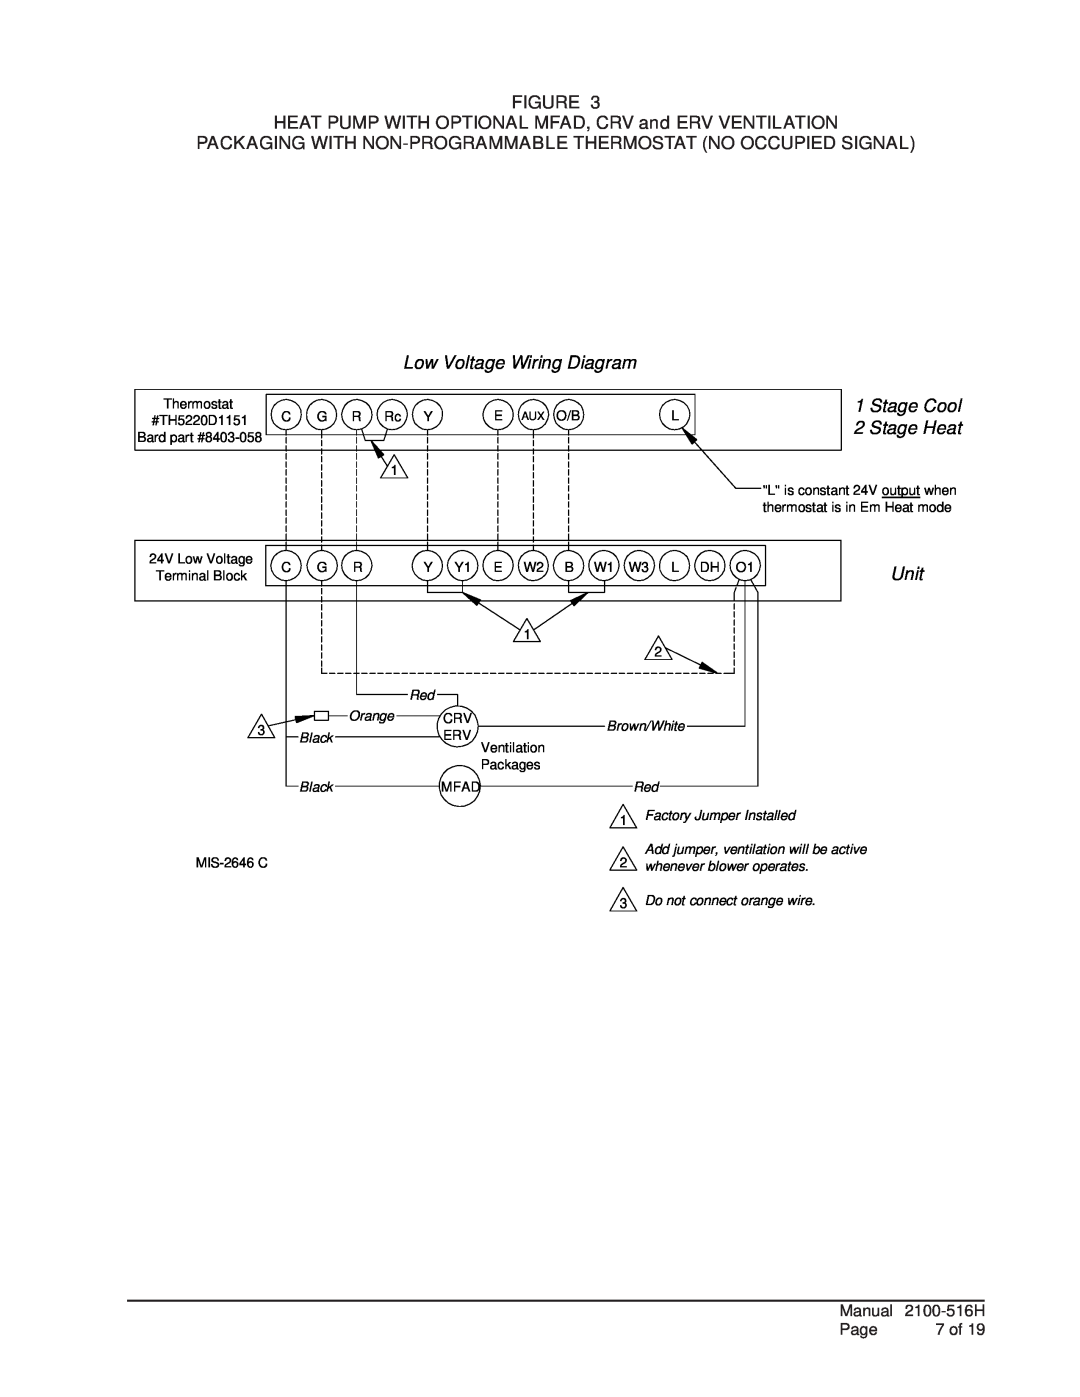 Bard W**H*D, S**H*D, T**H*D installation instructions Low Voltage Wiring Diagram, Unit, Stage Cool, Stage Heat 